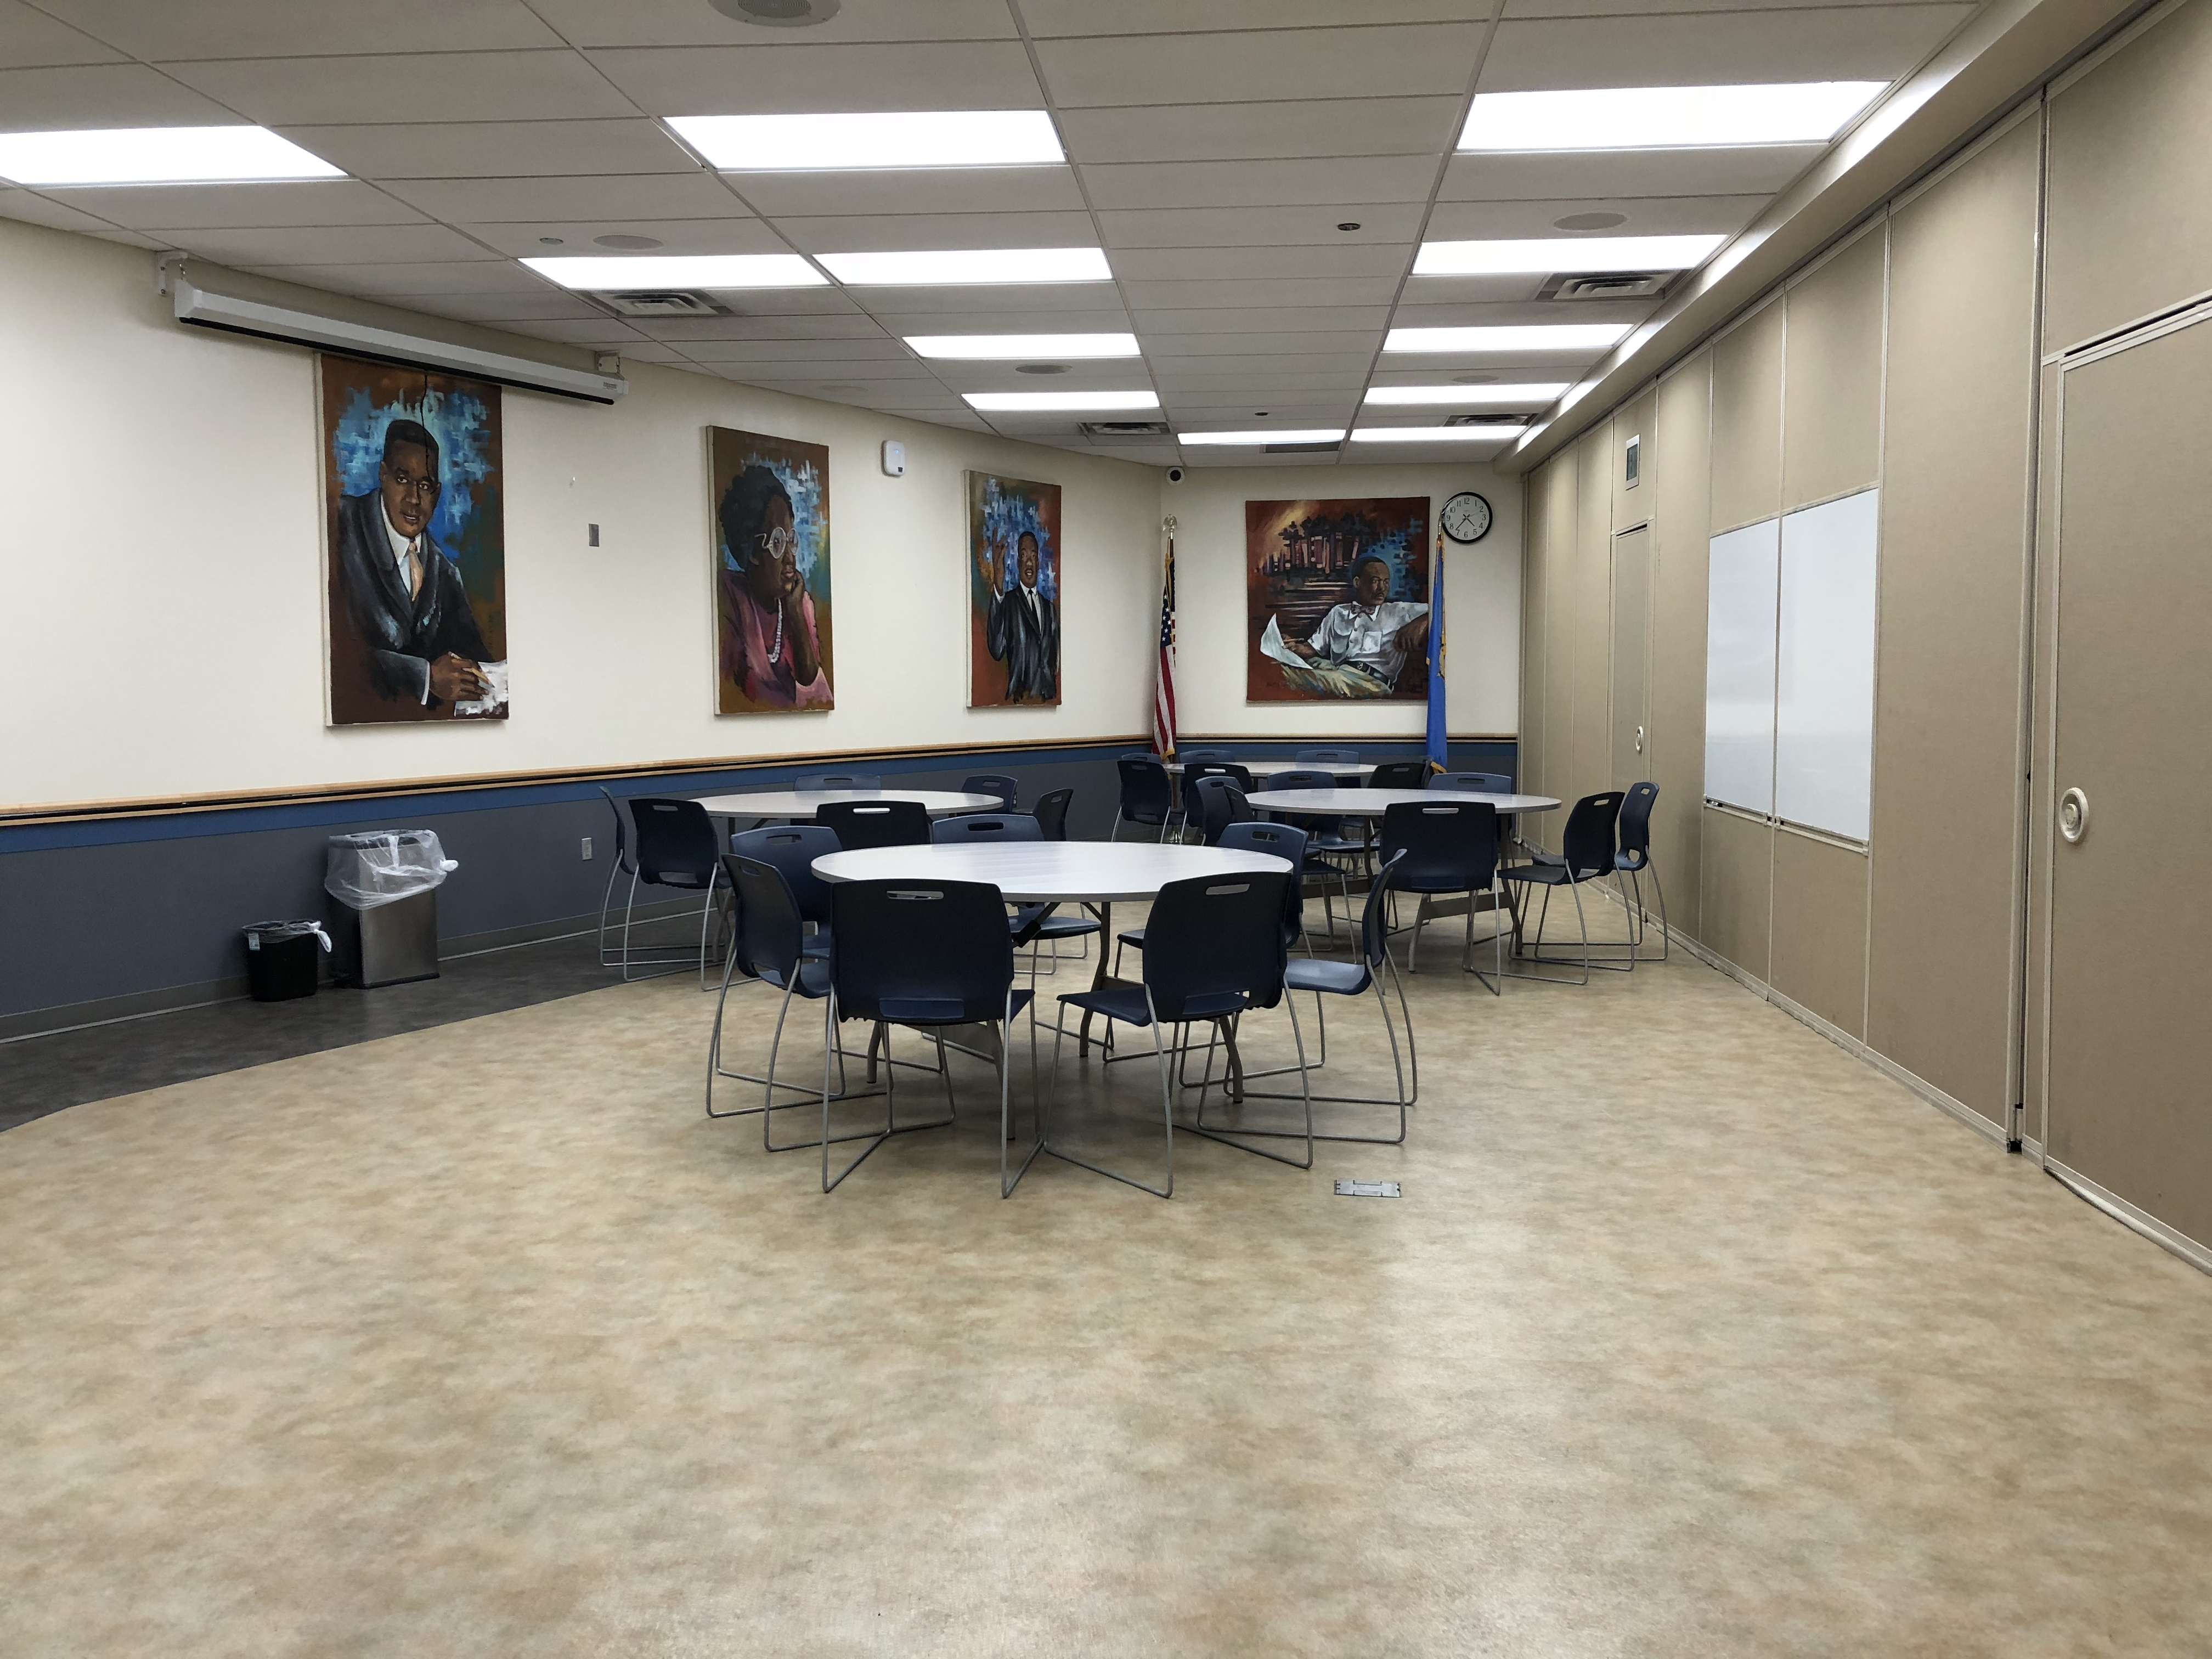 Meeting Room A at Ralph Ellison Library equipped with circular tables and chairs